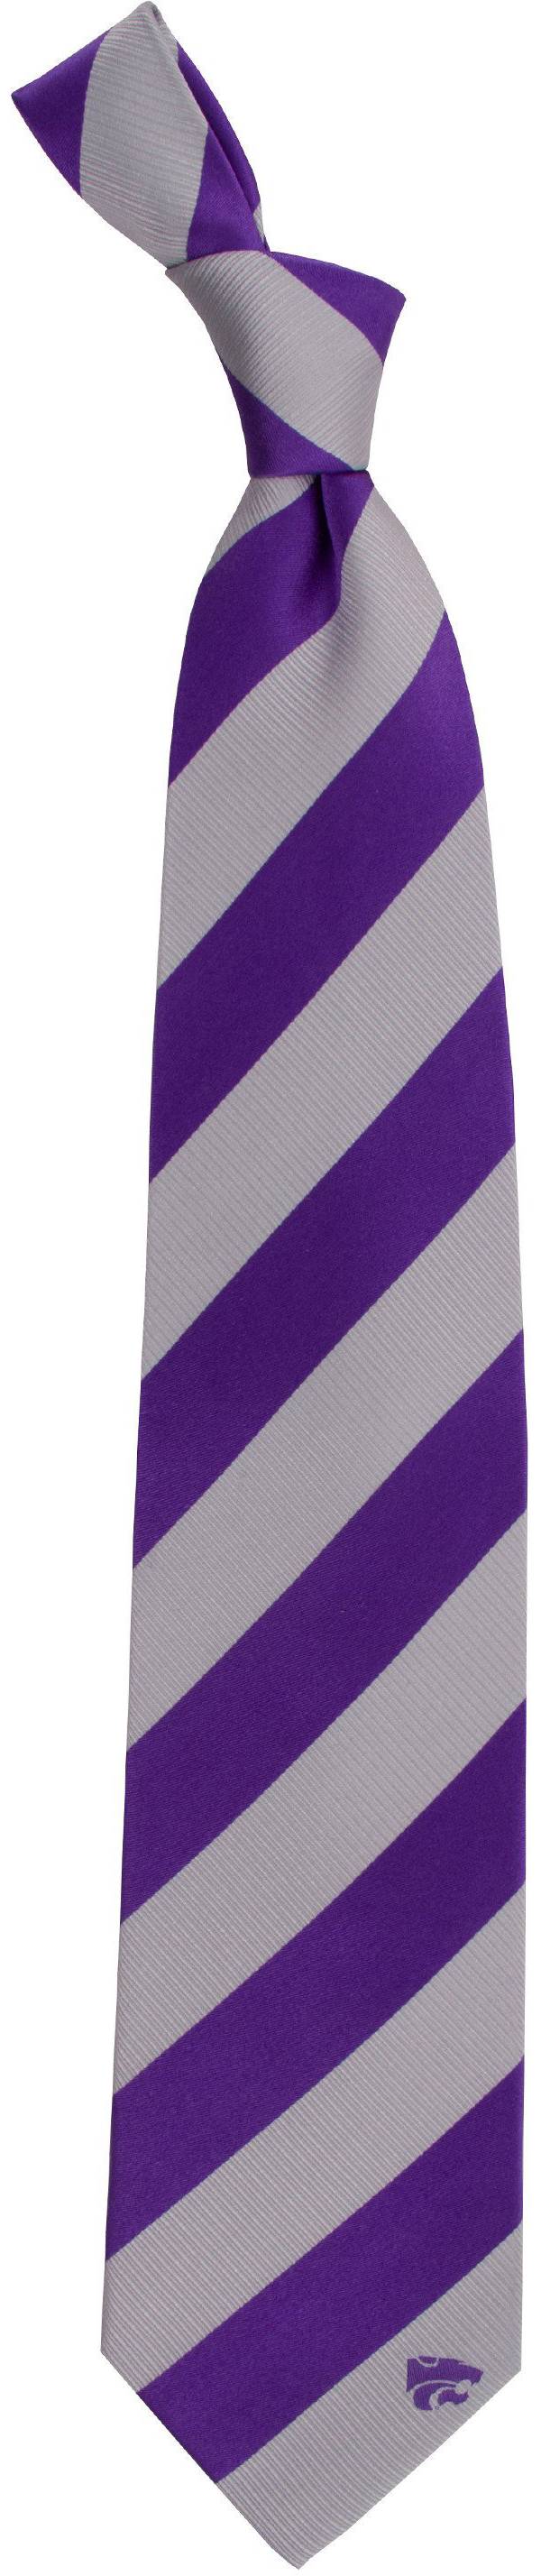 Eagles Wings Kansas State Wildhawks Woven Silk Necktie product image